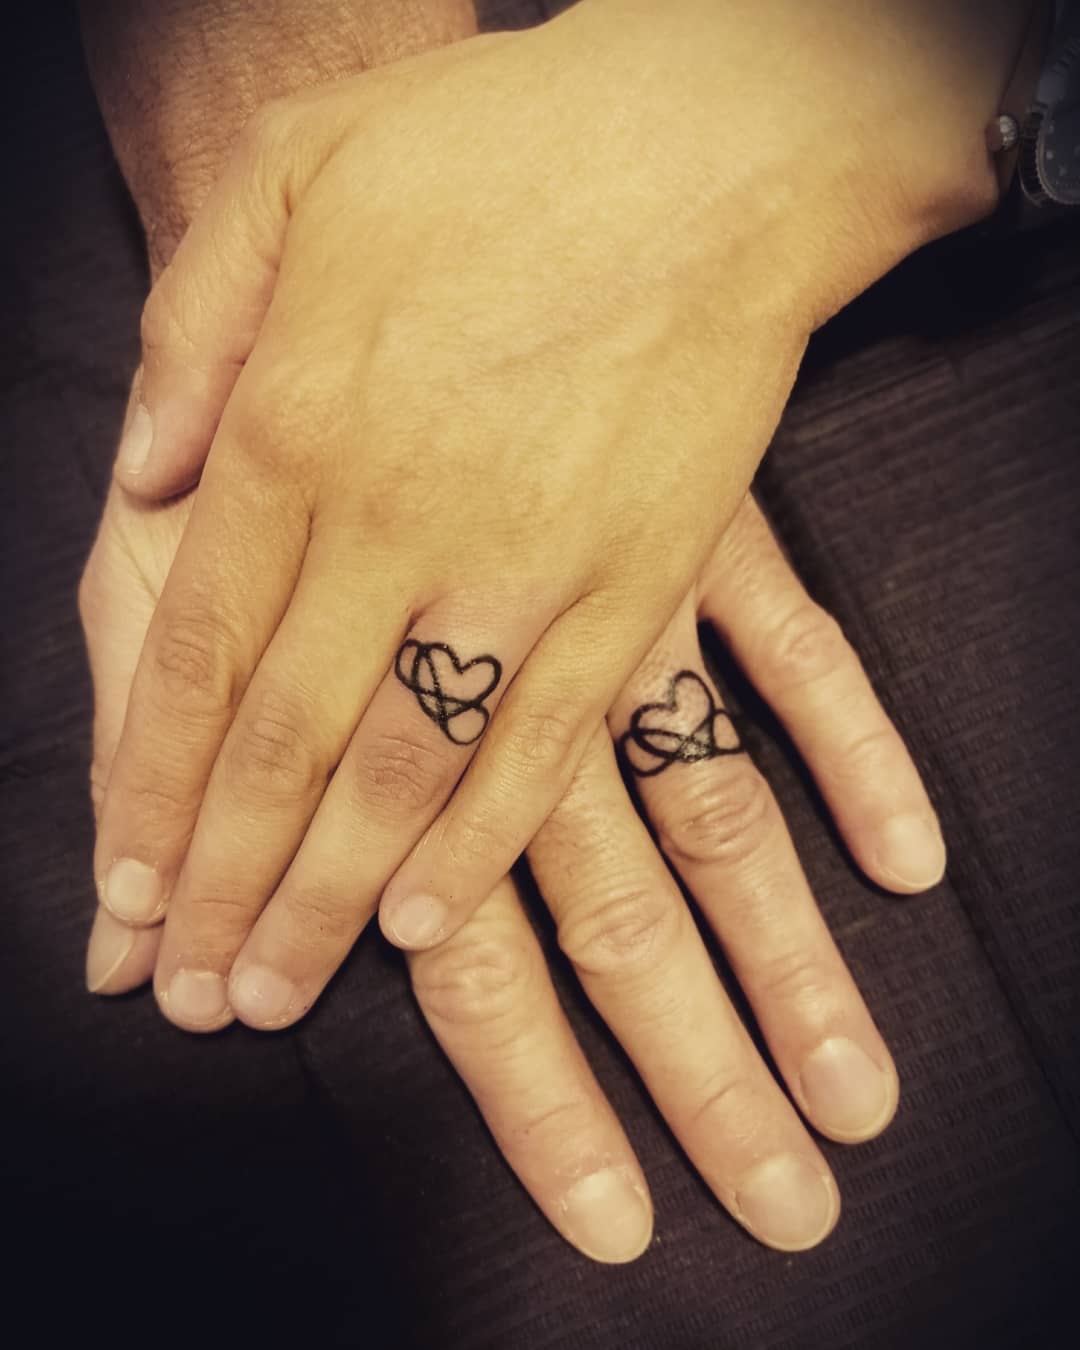 Wedding Ring Tattoos That Would Make Your Ring Finger Look